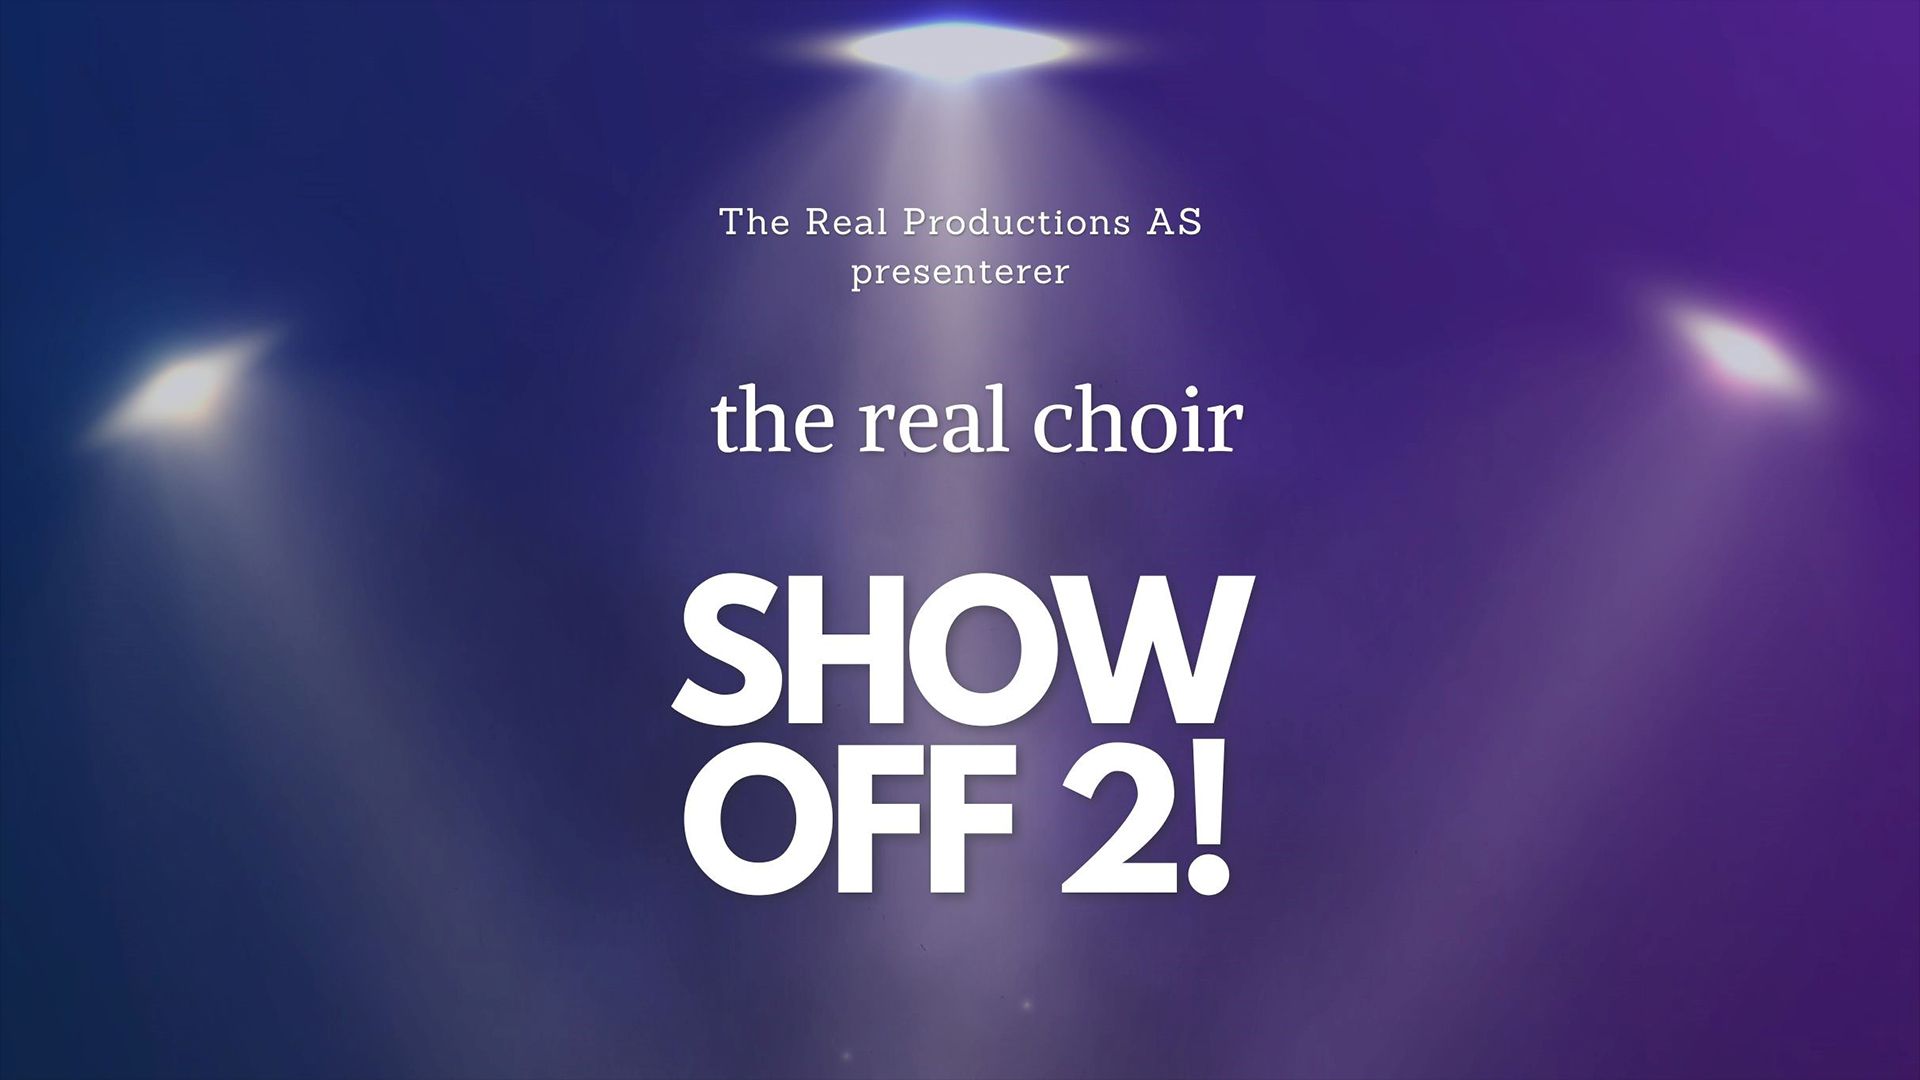 The real choir - show off 2!